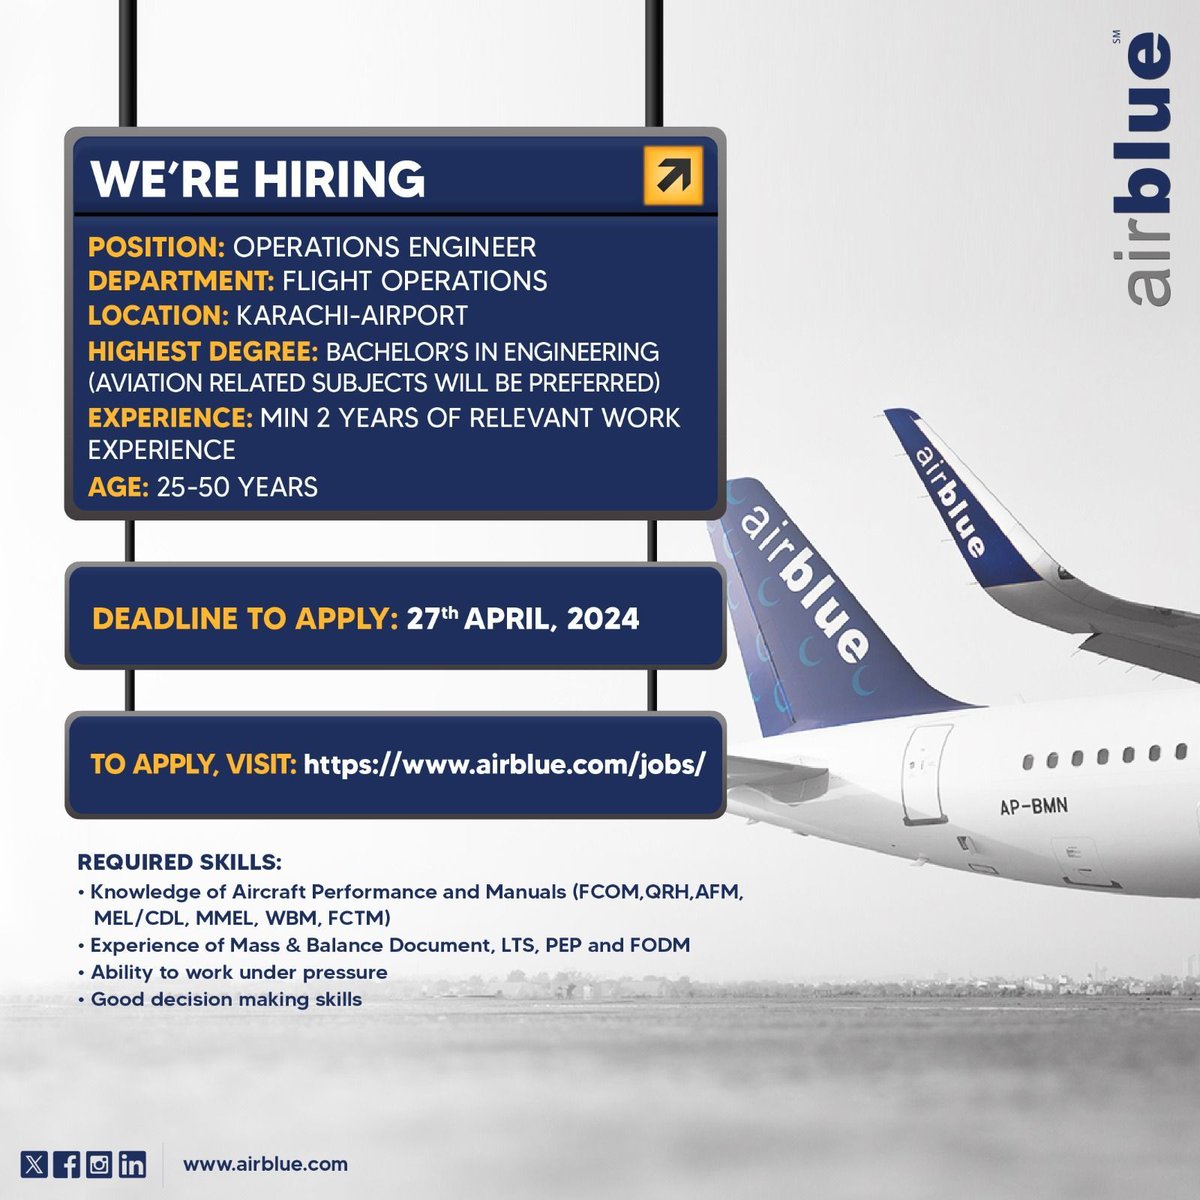 This is your chance to join our team. Position: Client Relations Executive Location: Karachi Deadline: 27th April 2024 To apply, visit: airblue.com/jobs/ #airblue #hiringalert #airbluejobs #hiringnow